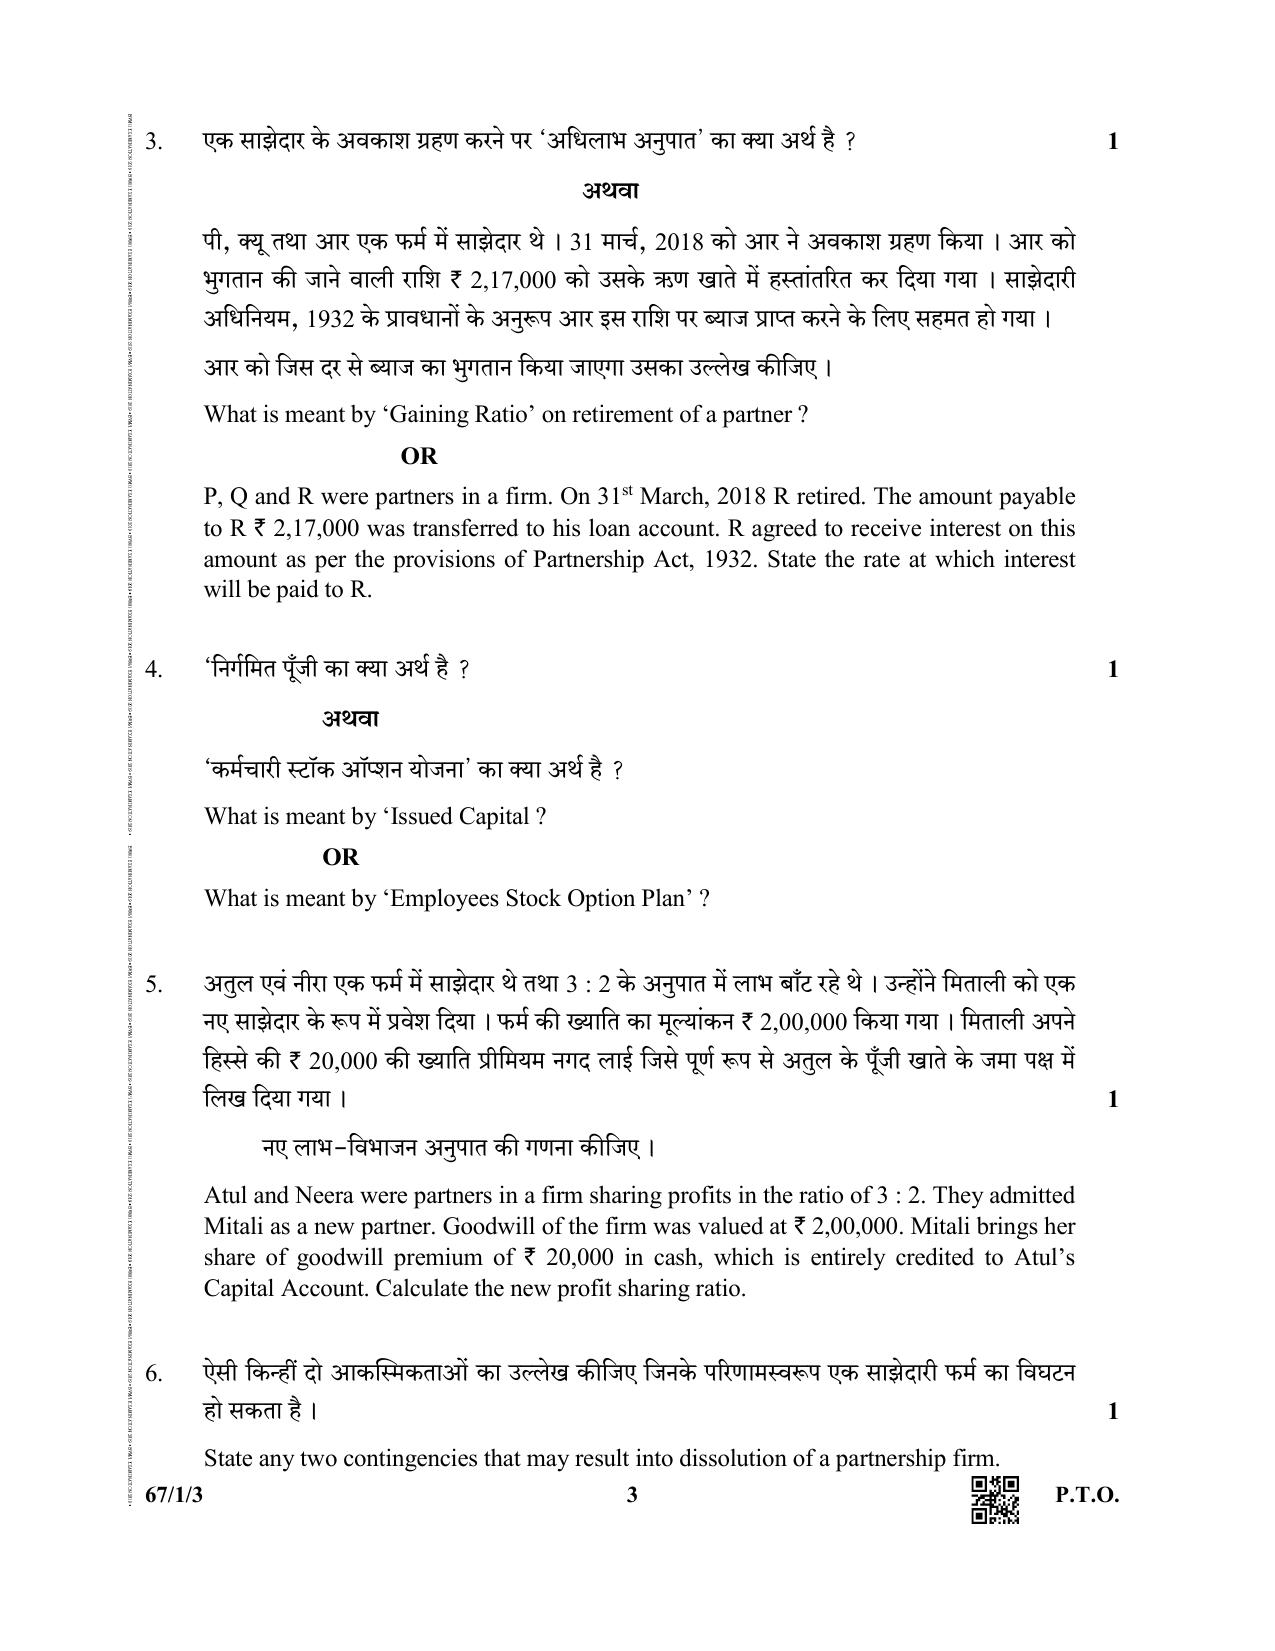 CBSE Class 12 67-1-3  (Accountancy) 2019 Question Paper - Page 3